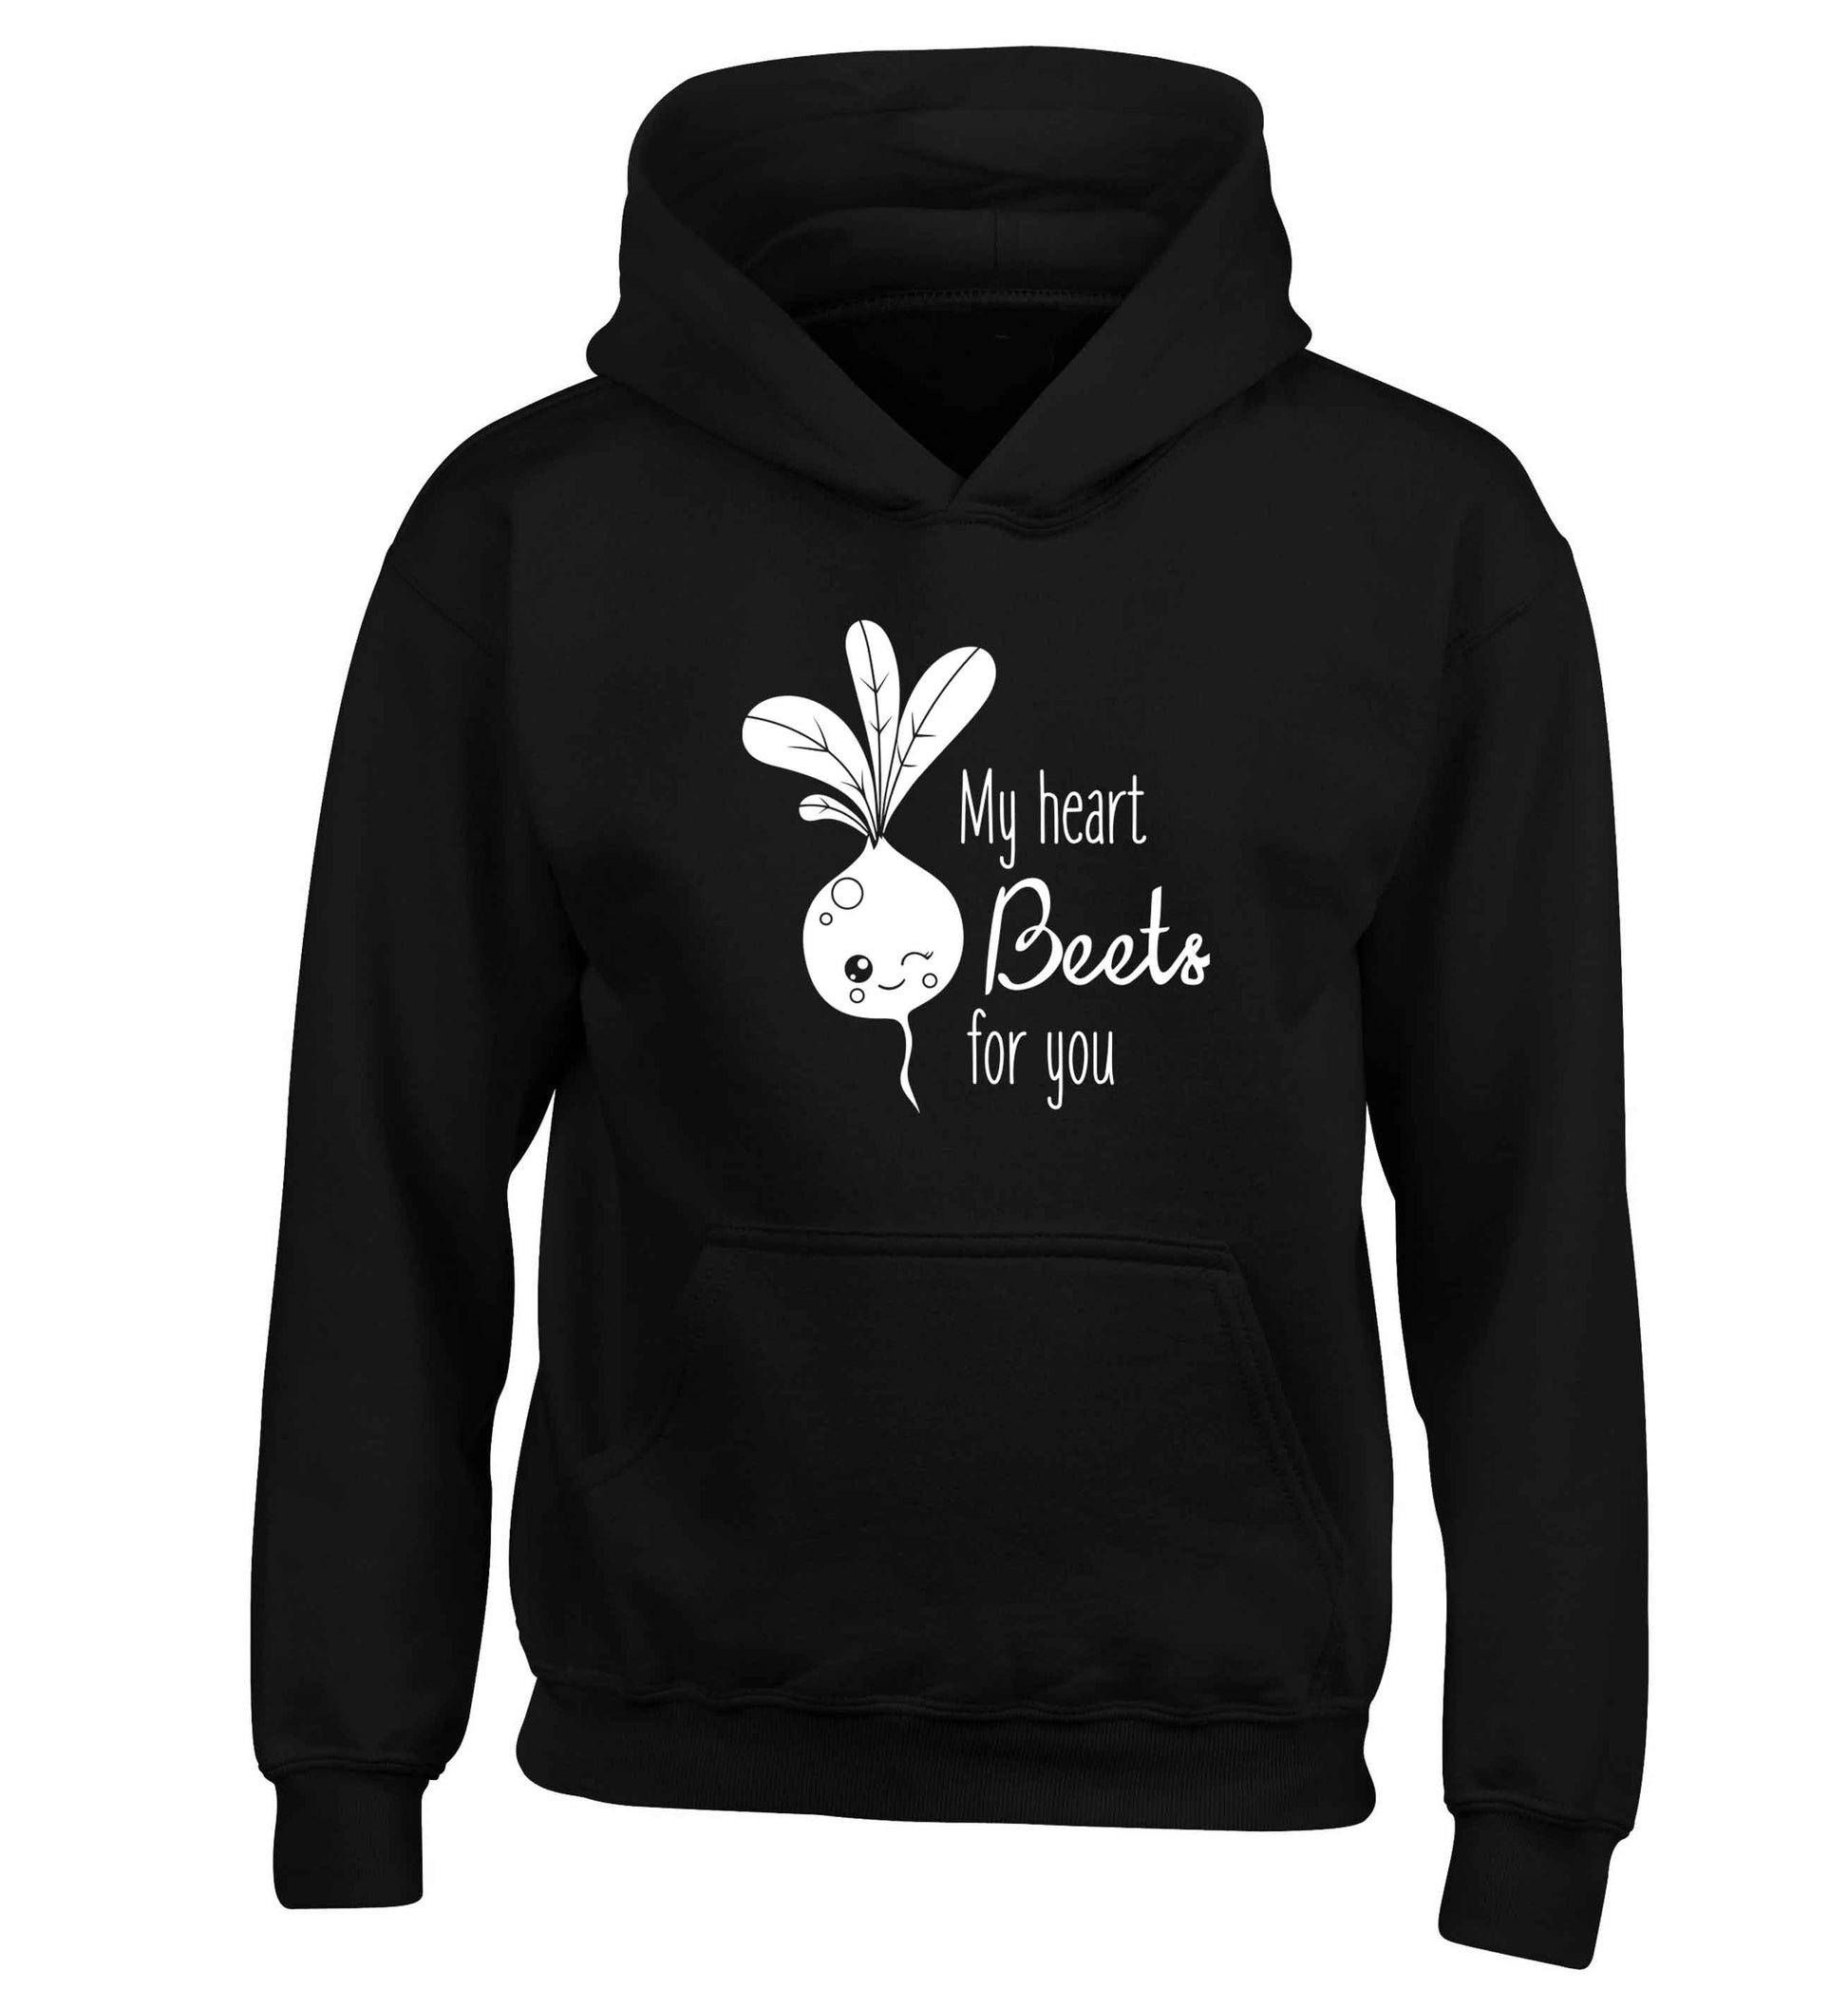 My heart beets for you children's black hoodie 12-13 Years